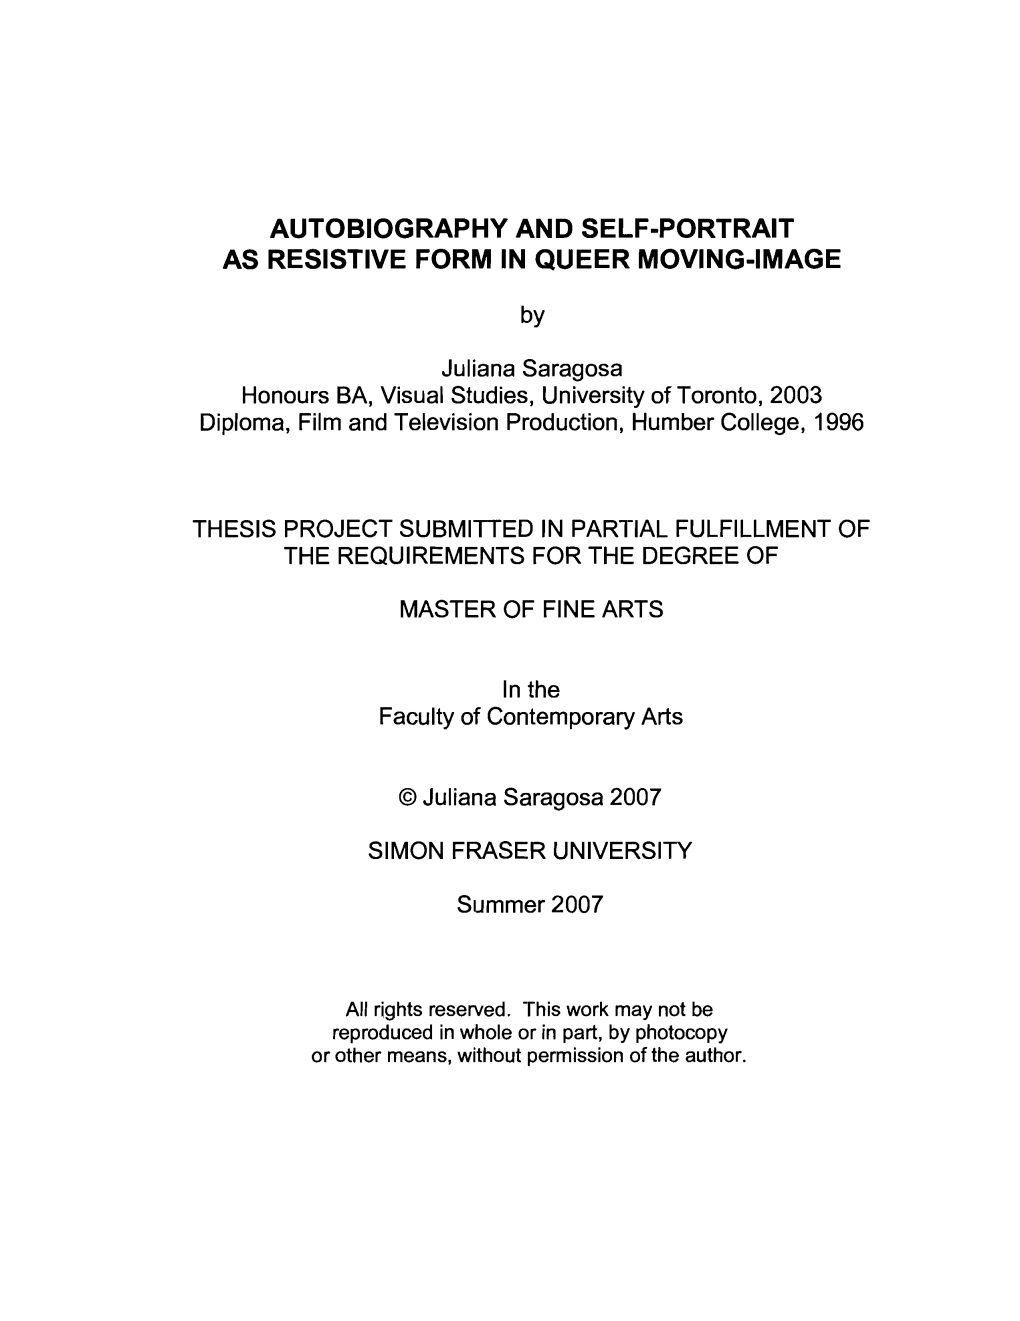 Autobiography and Self-Portrait As Resistive Form in Queer Moving-Image